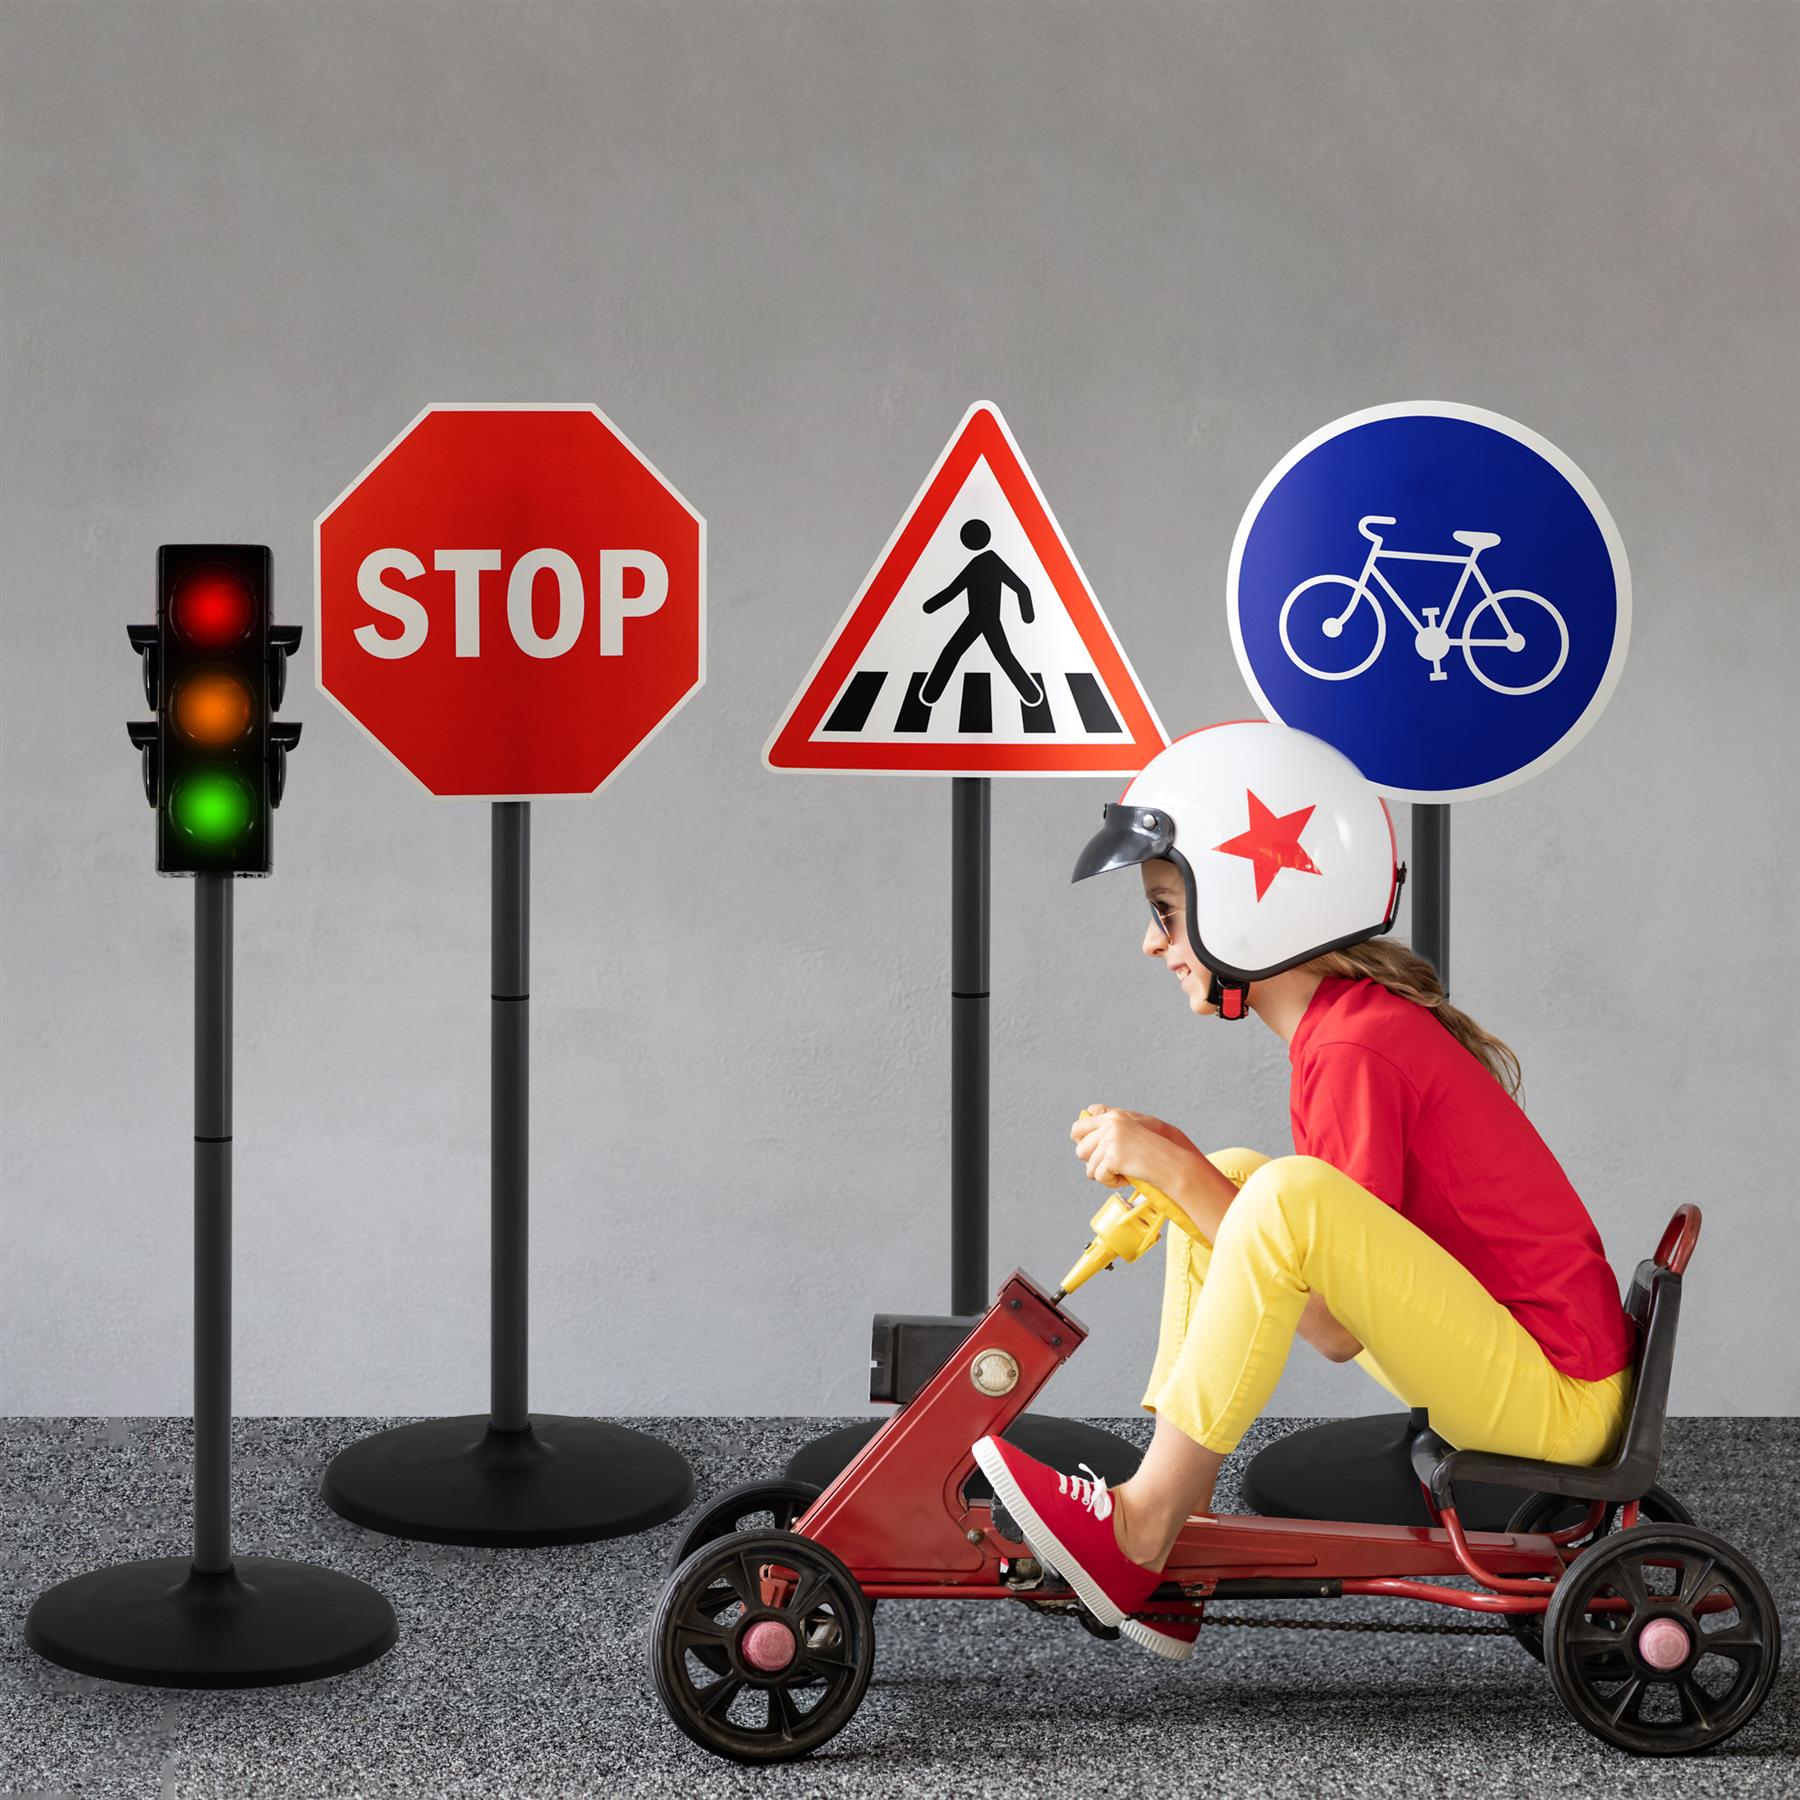 The Magic Toy Shop Toys and Games Set of Road Signs and Traffic Lights